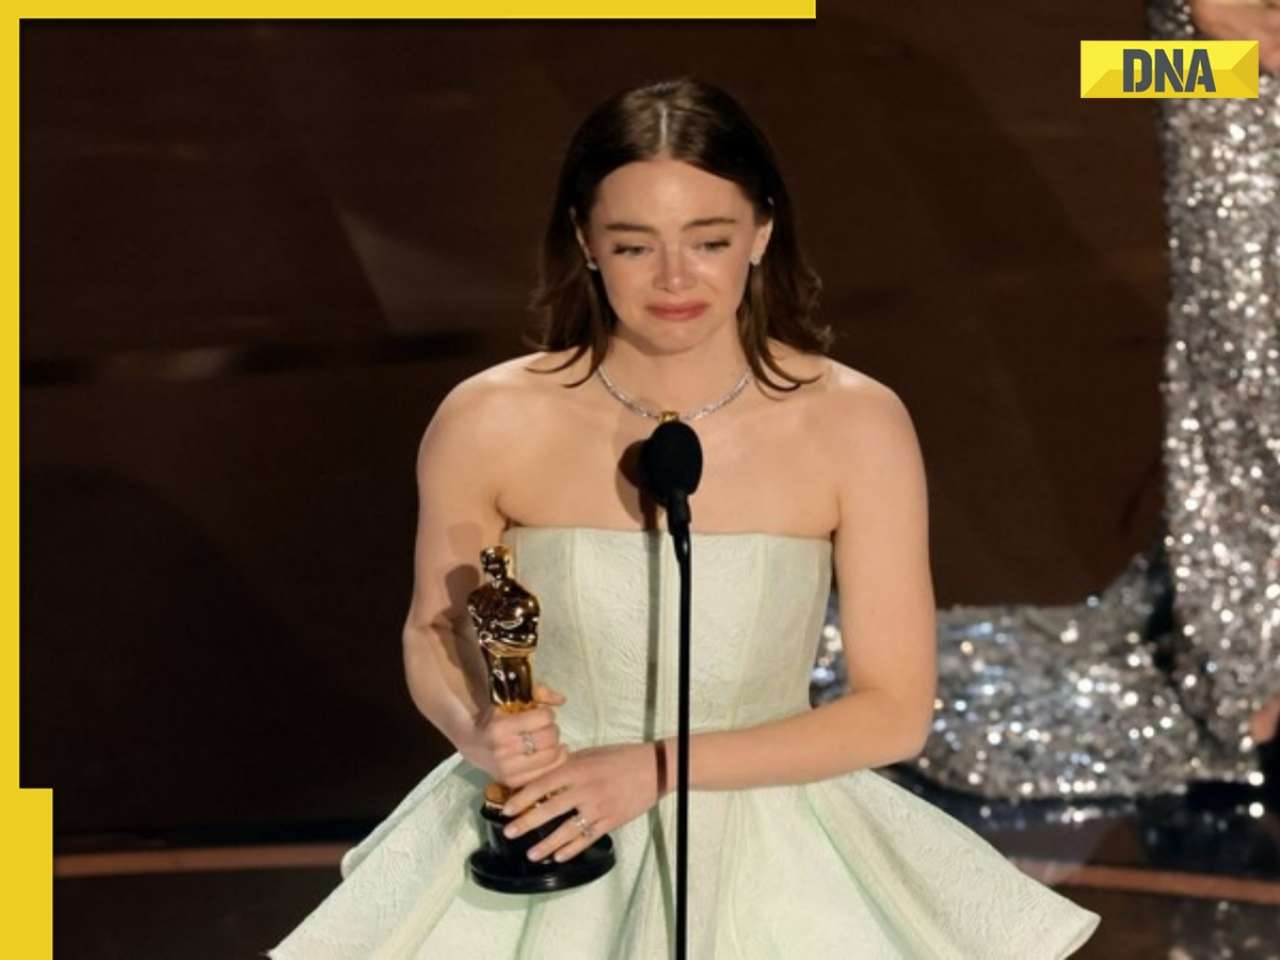 Meet Emma Stone, Best Actress Oscar winner, left college for acting, worked at bakery, now world's highest-paid actress